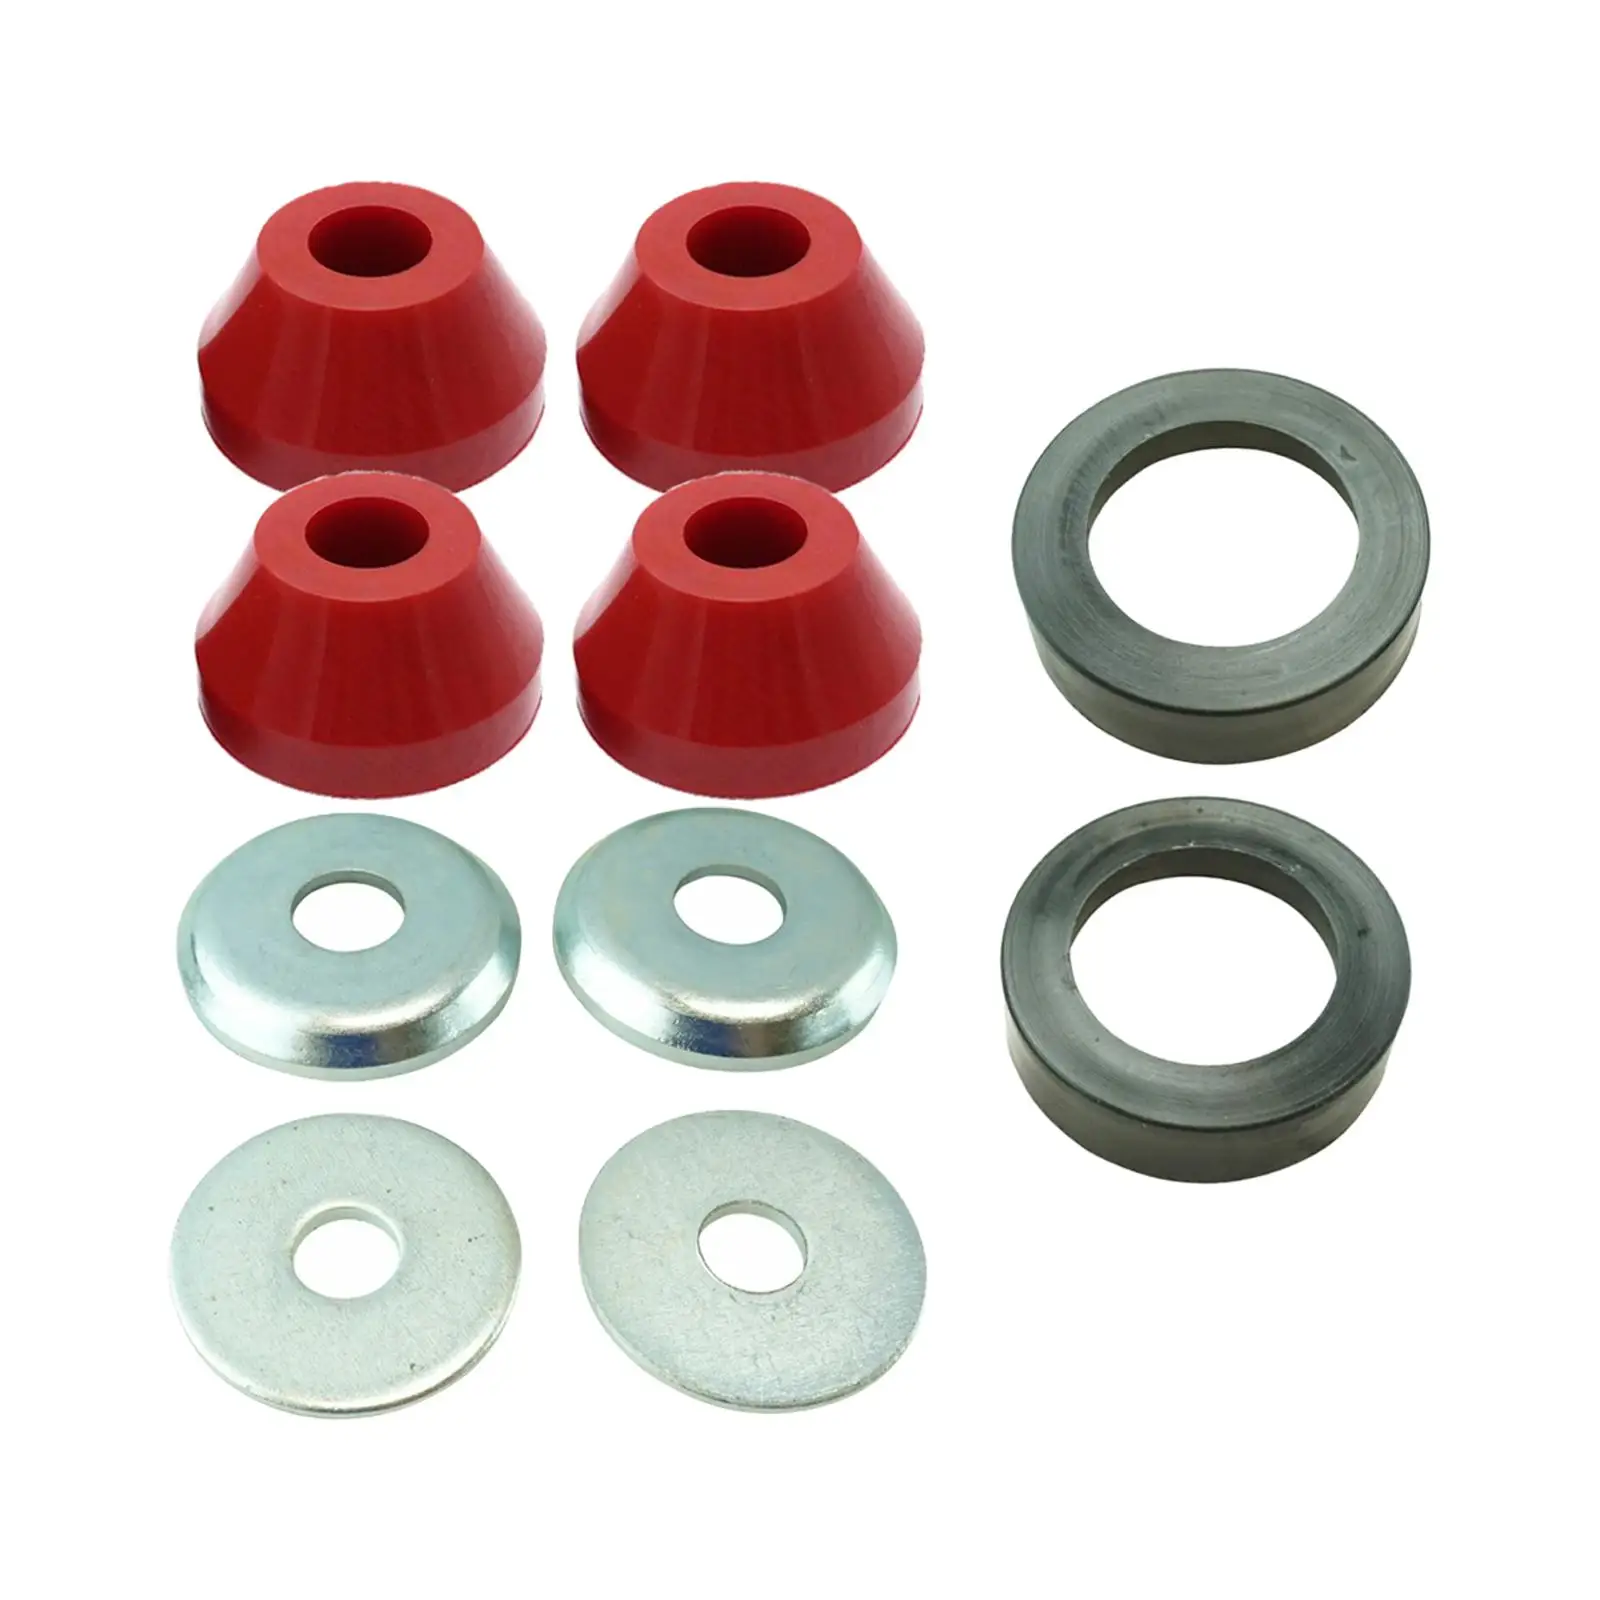 Radius Arm Bushing Spare Parts Fittings Expert For Ranger F250